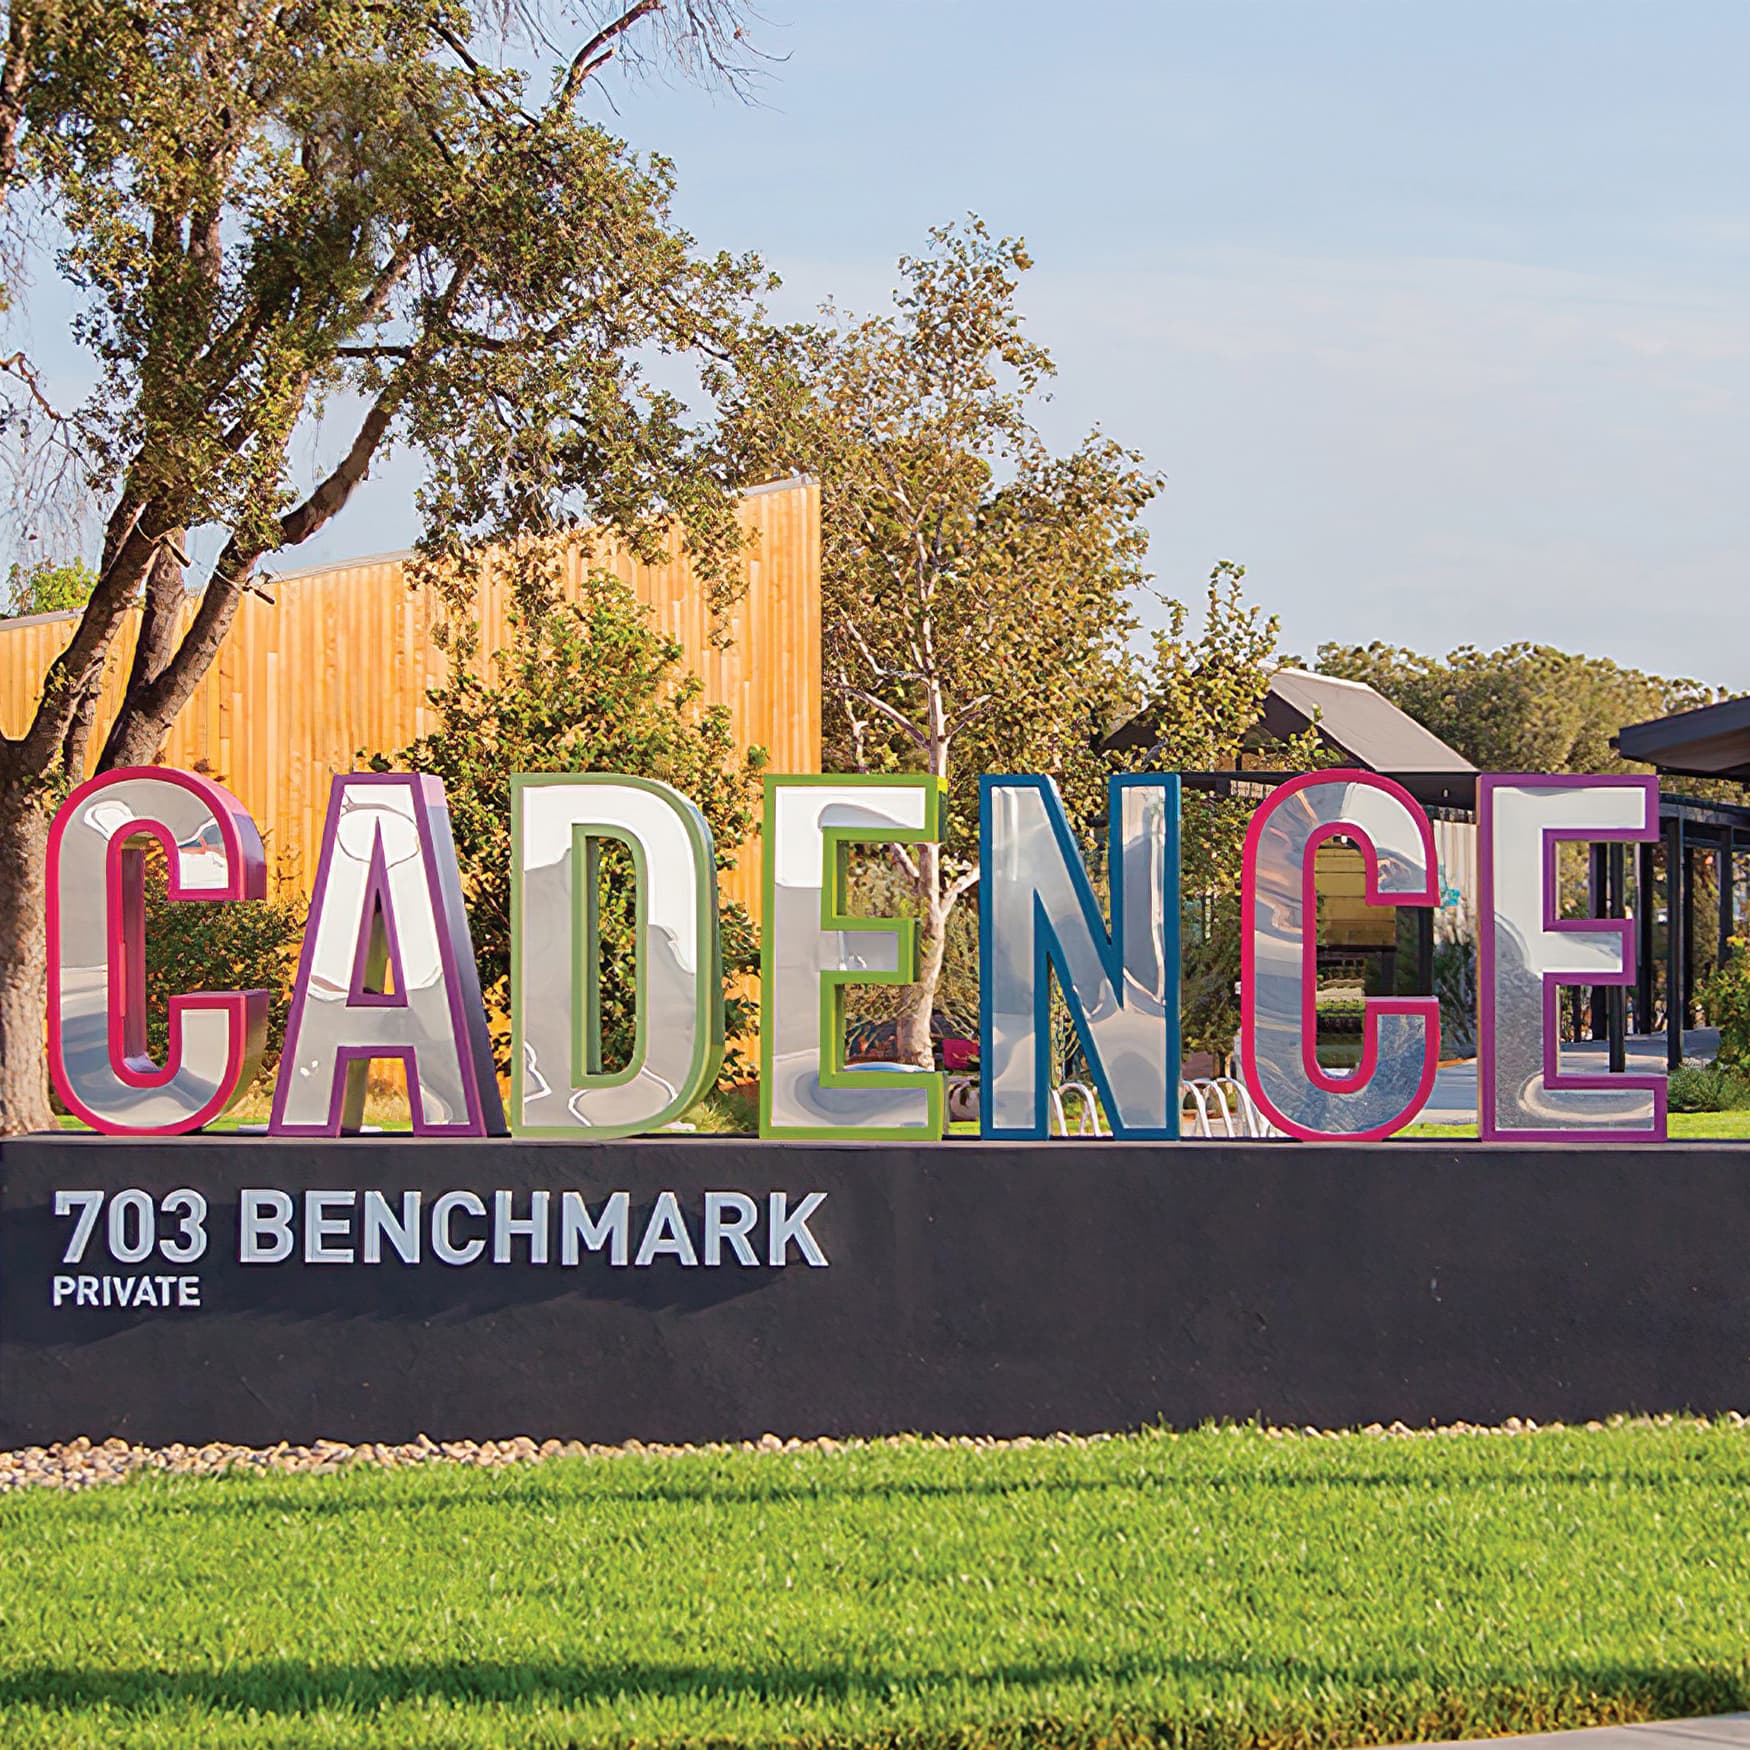 A monument sign at Cadence Park in Irvine, California (RSM Design) marks the entrance of one of many parks within the Great Park Neighborhoods.